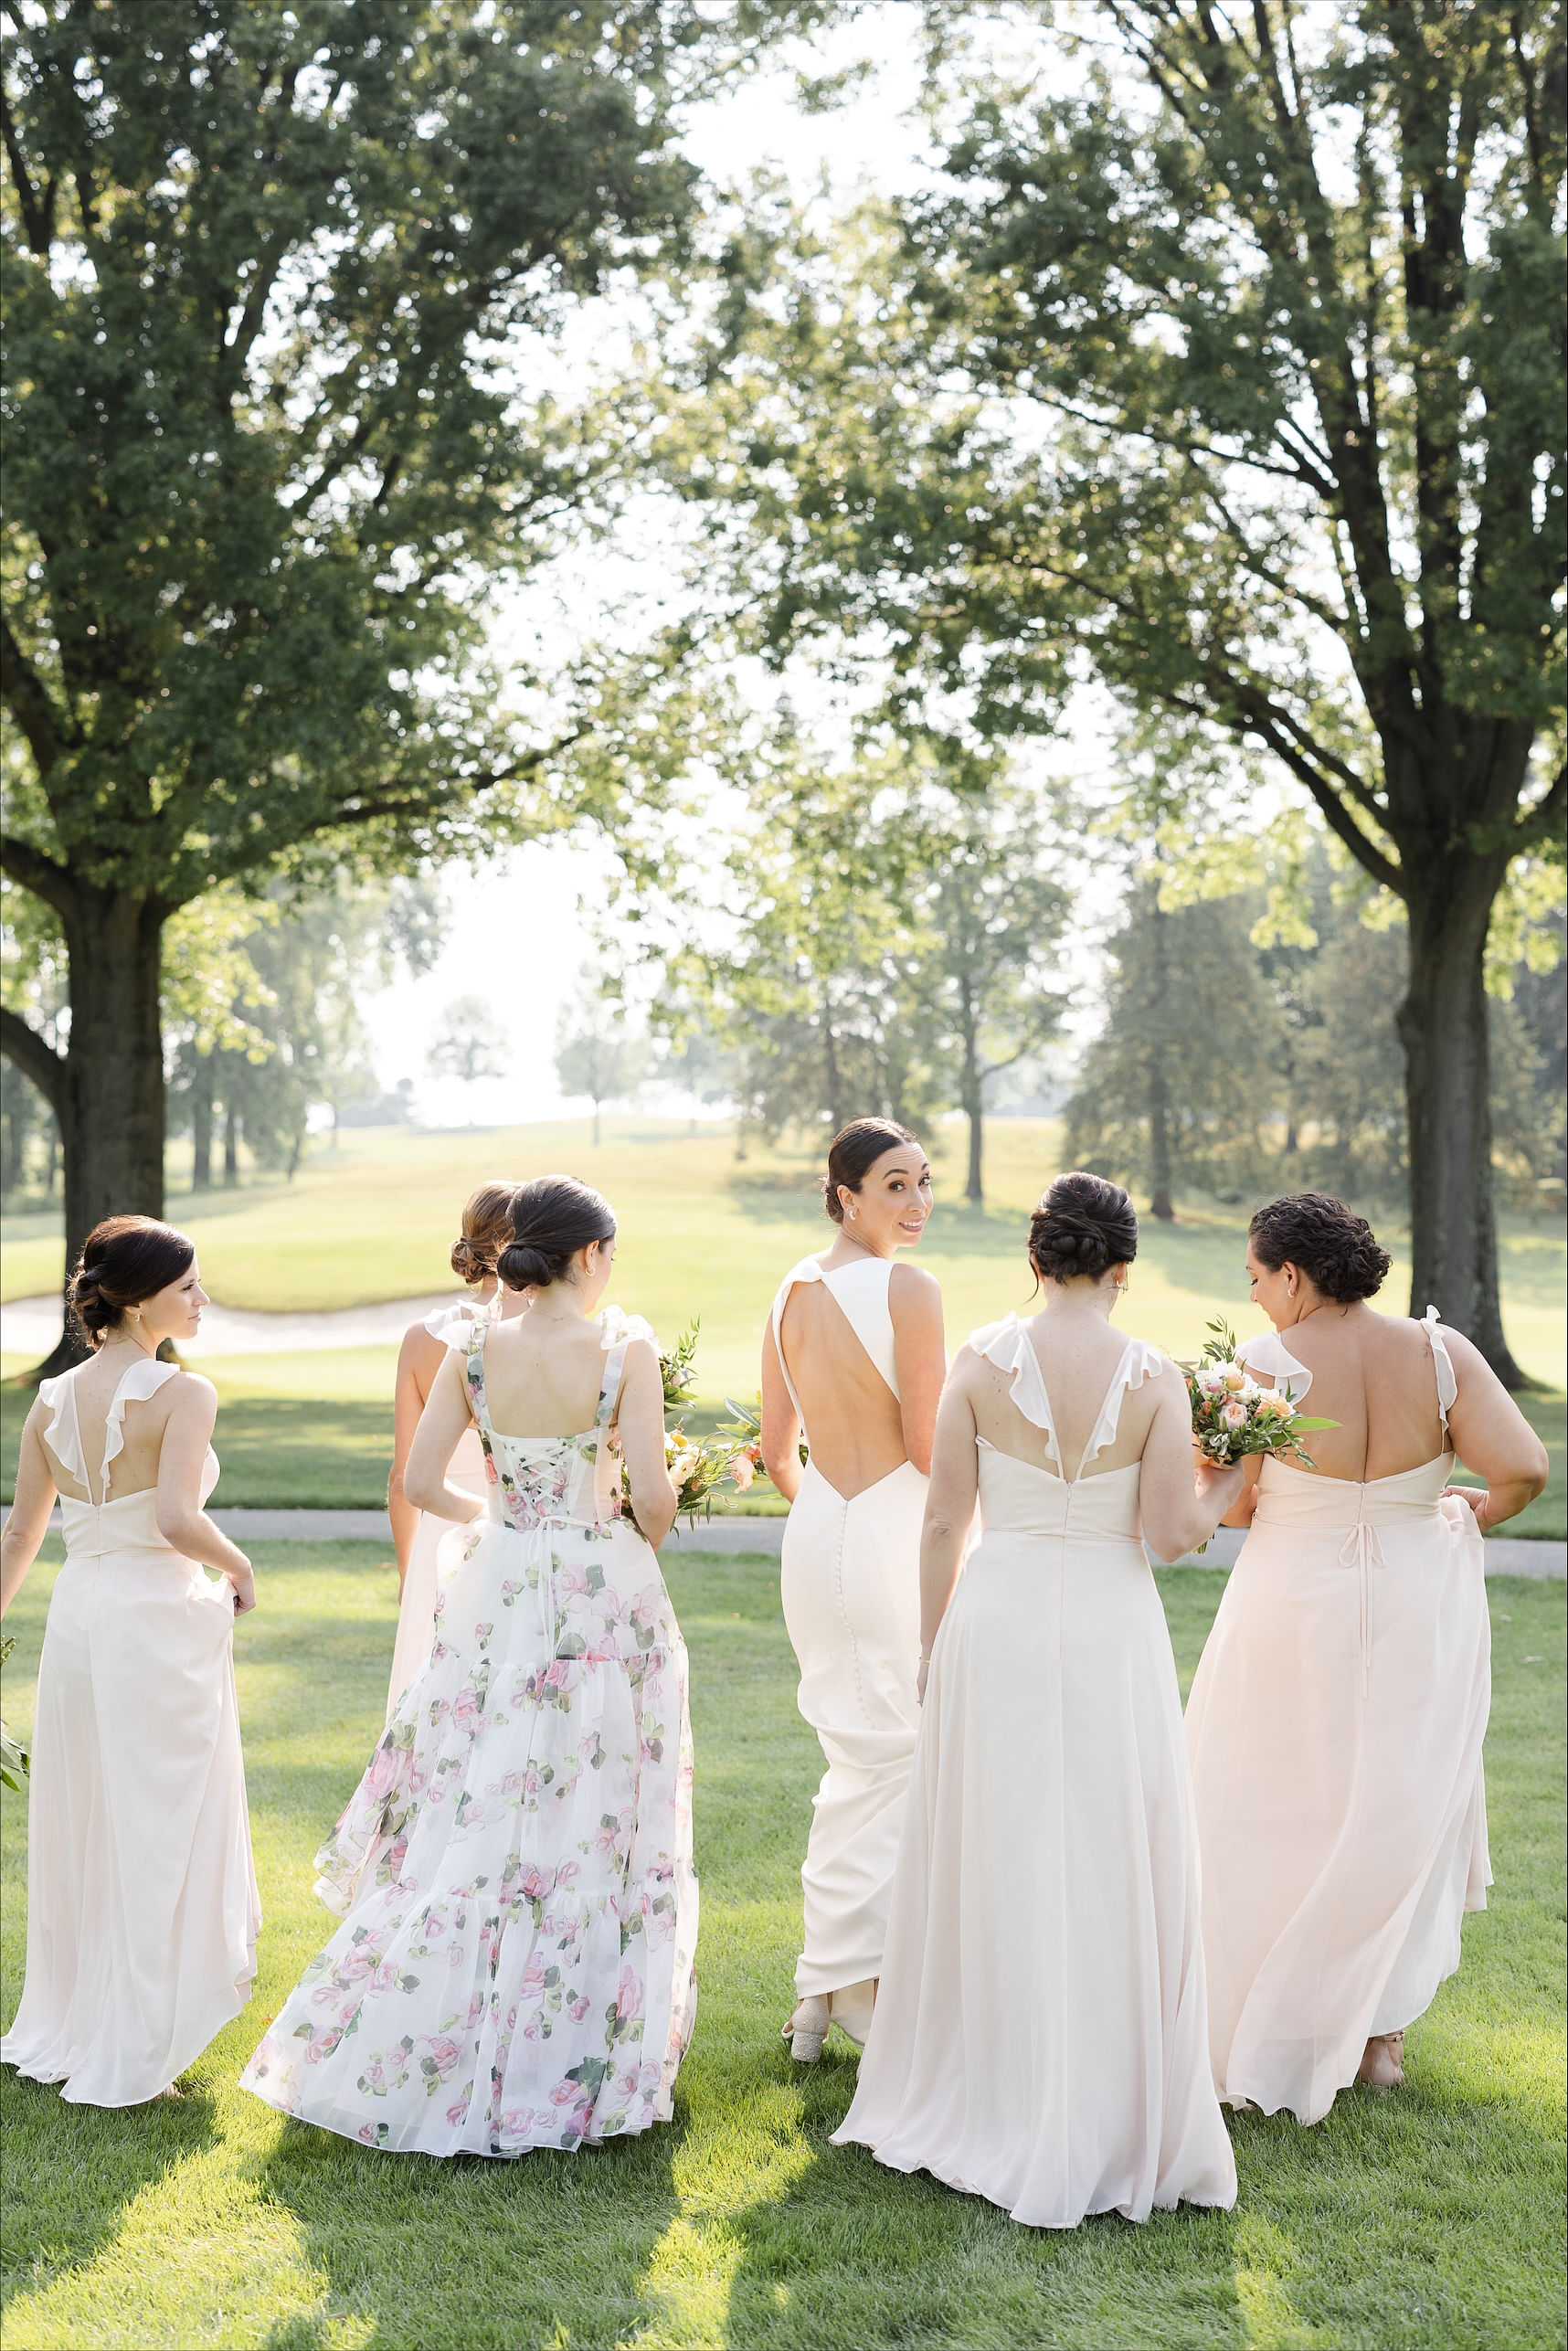 Bridesmaids in pastel dresses holding bouquets, walking together on a lush green lawn.